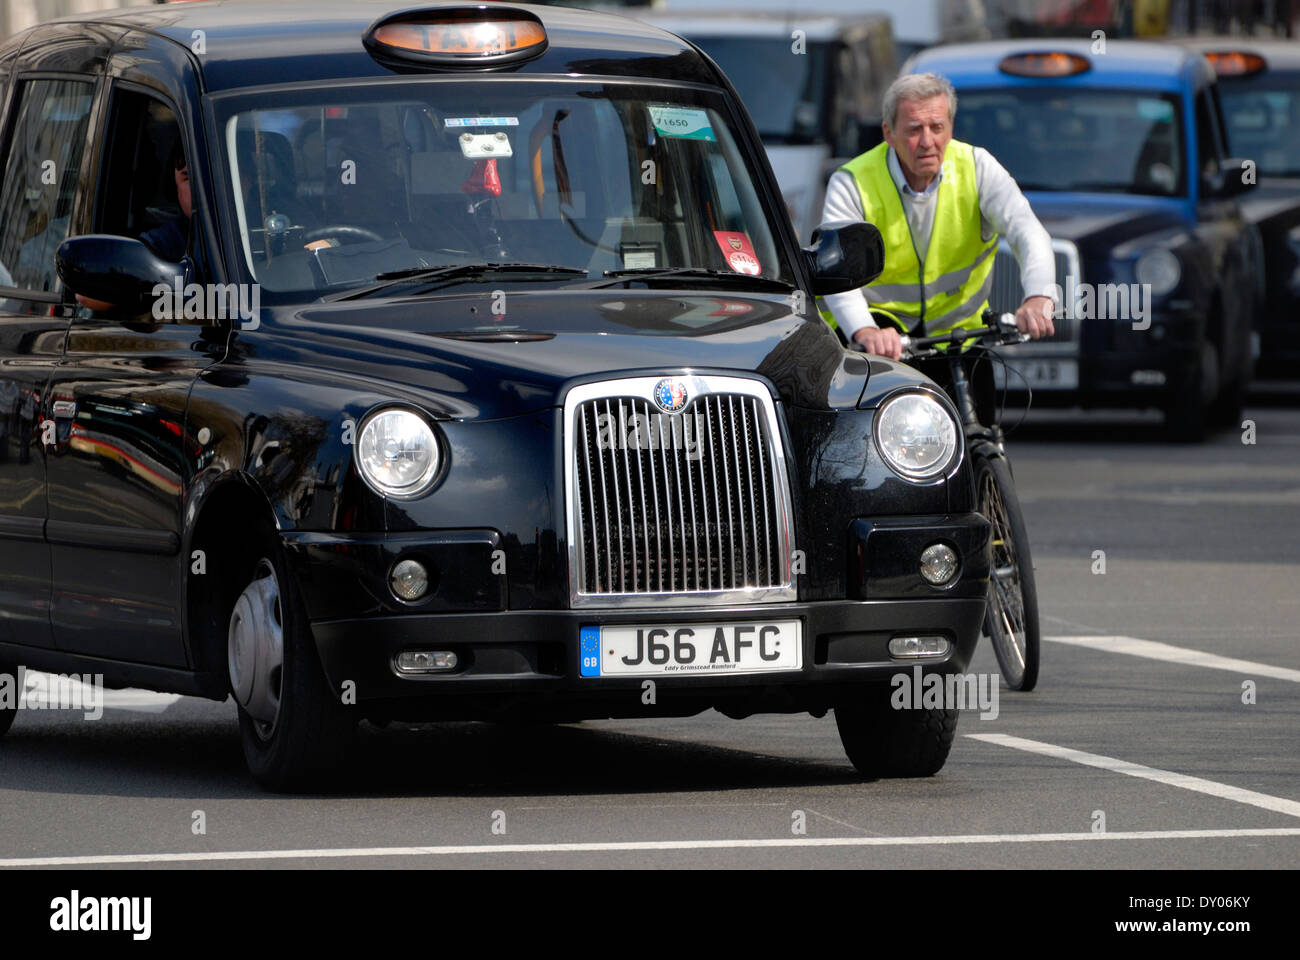 London, England, UK. Black taxi cab and cyclist Stock Photo